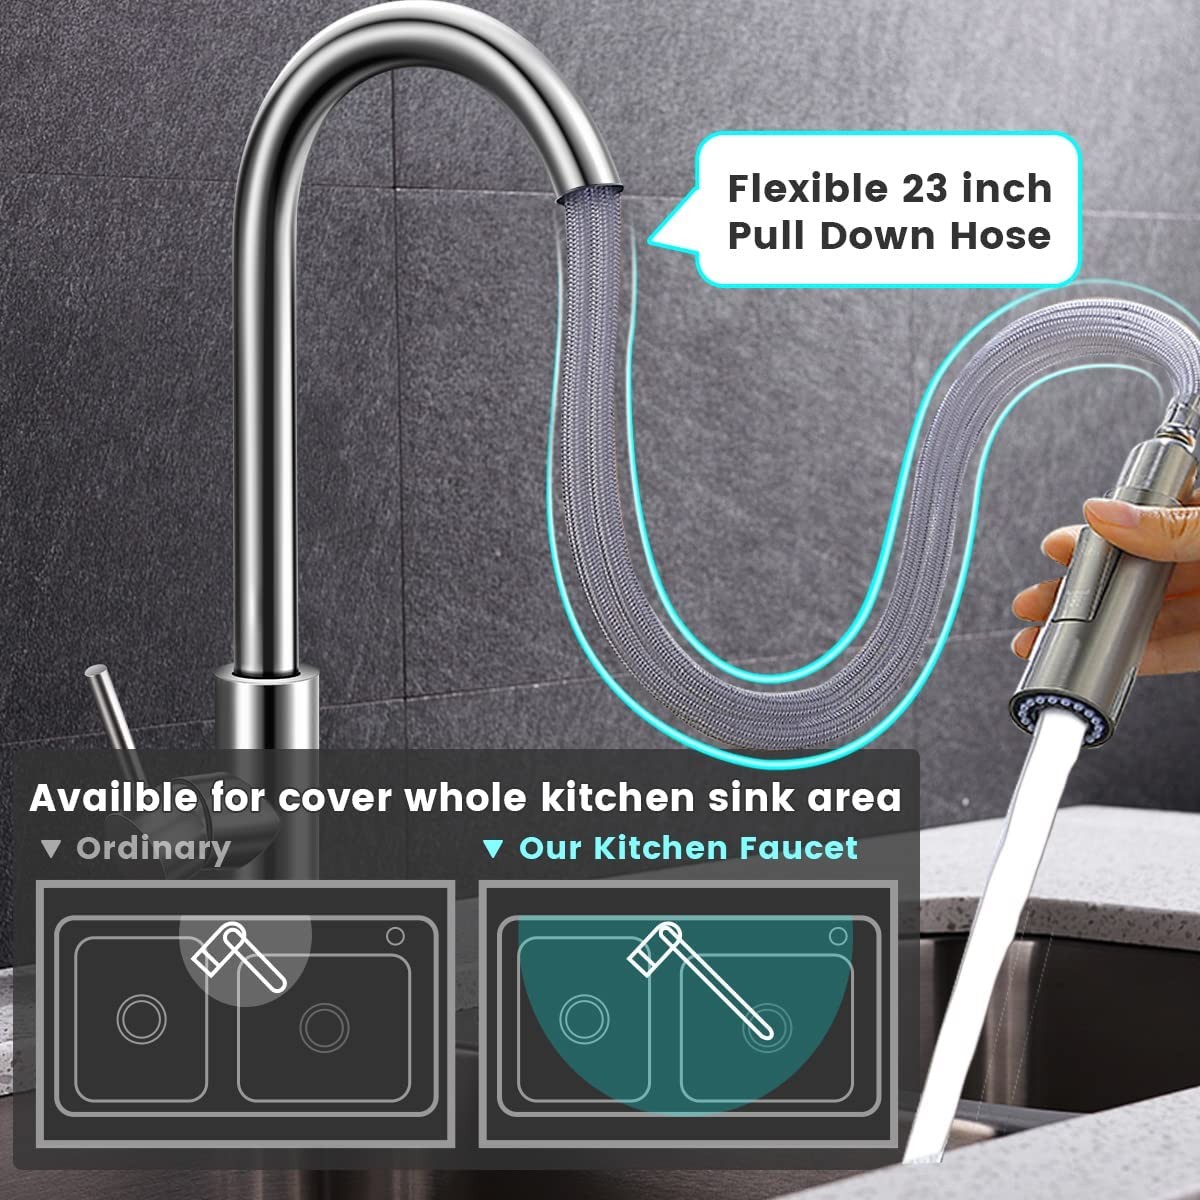 Brushed Nickel Touch Kitchen Faucets With Pull Down Sprayer Automatic Sensor Kitchen Mixer Tap Hot Cold Pull Out Touch Faucet